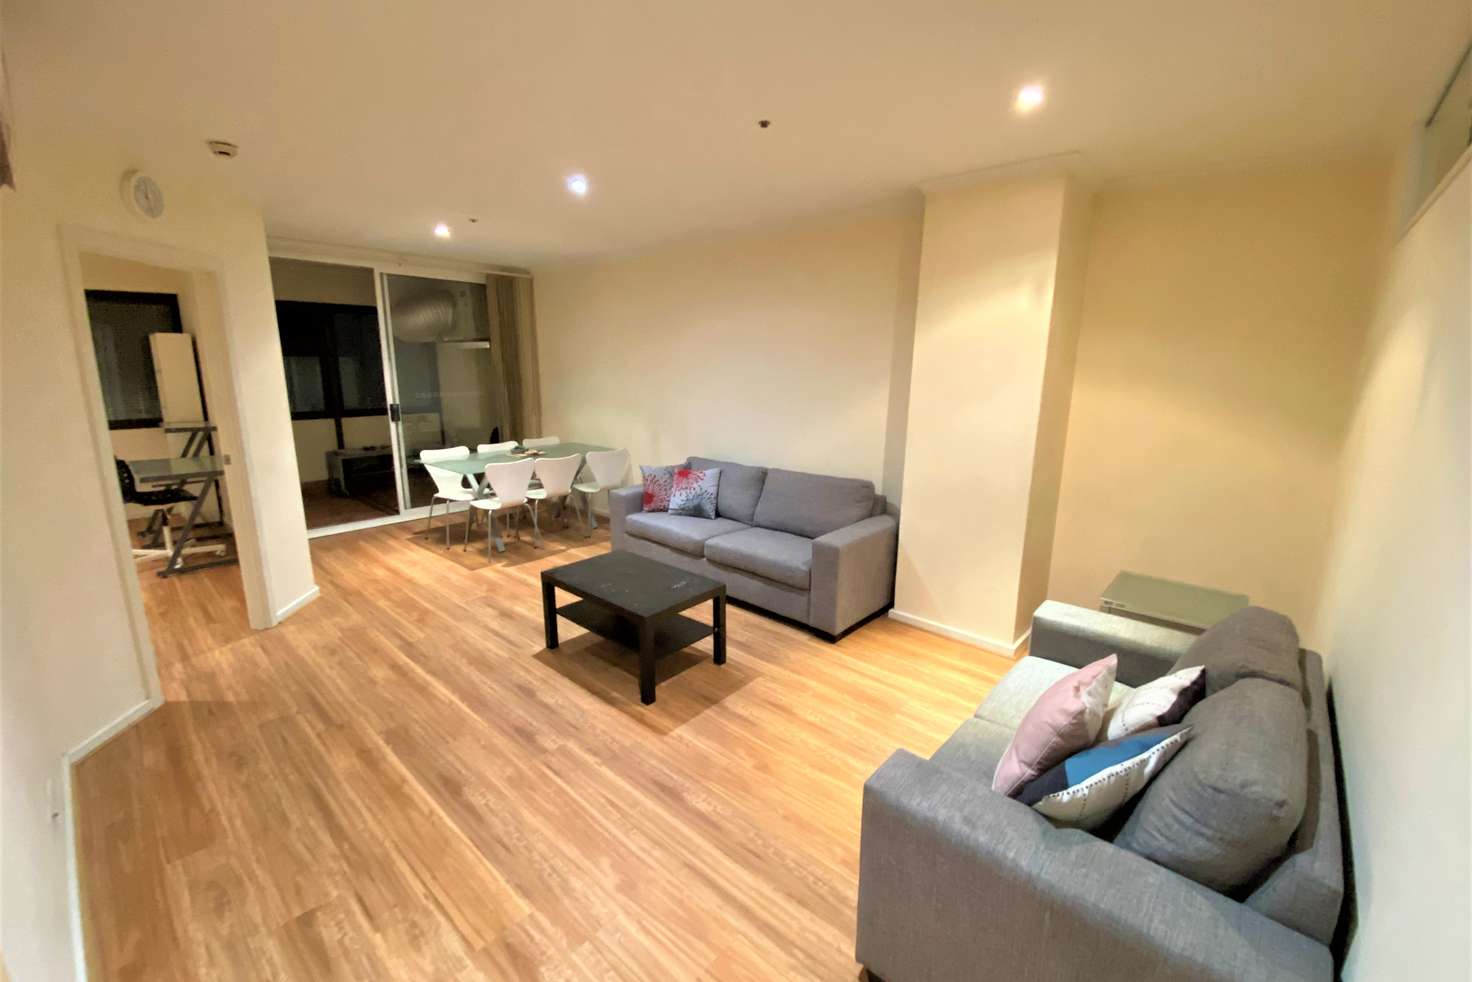 Main view of Homely apartment listing, 65 King William Street, Adelaide SA 5000